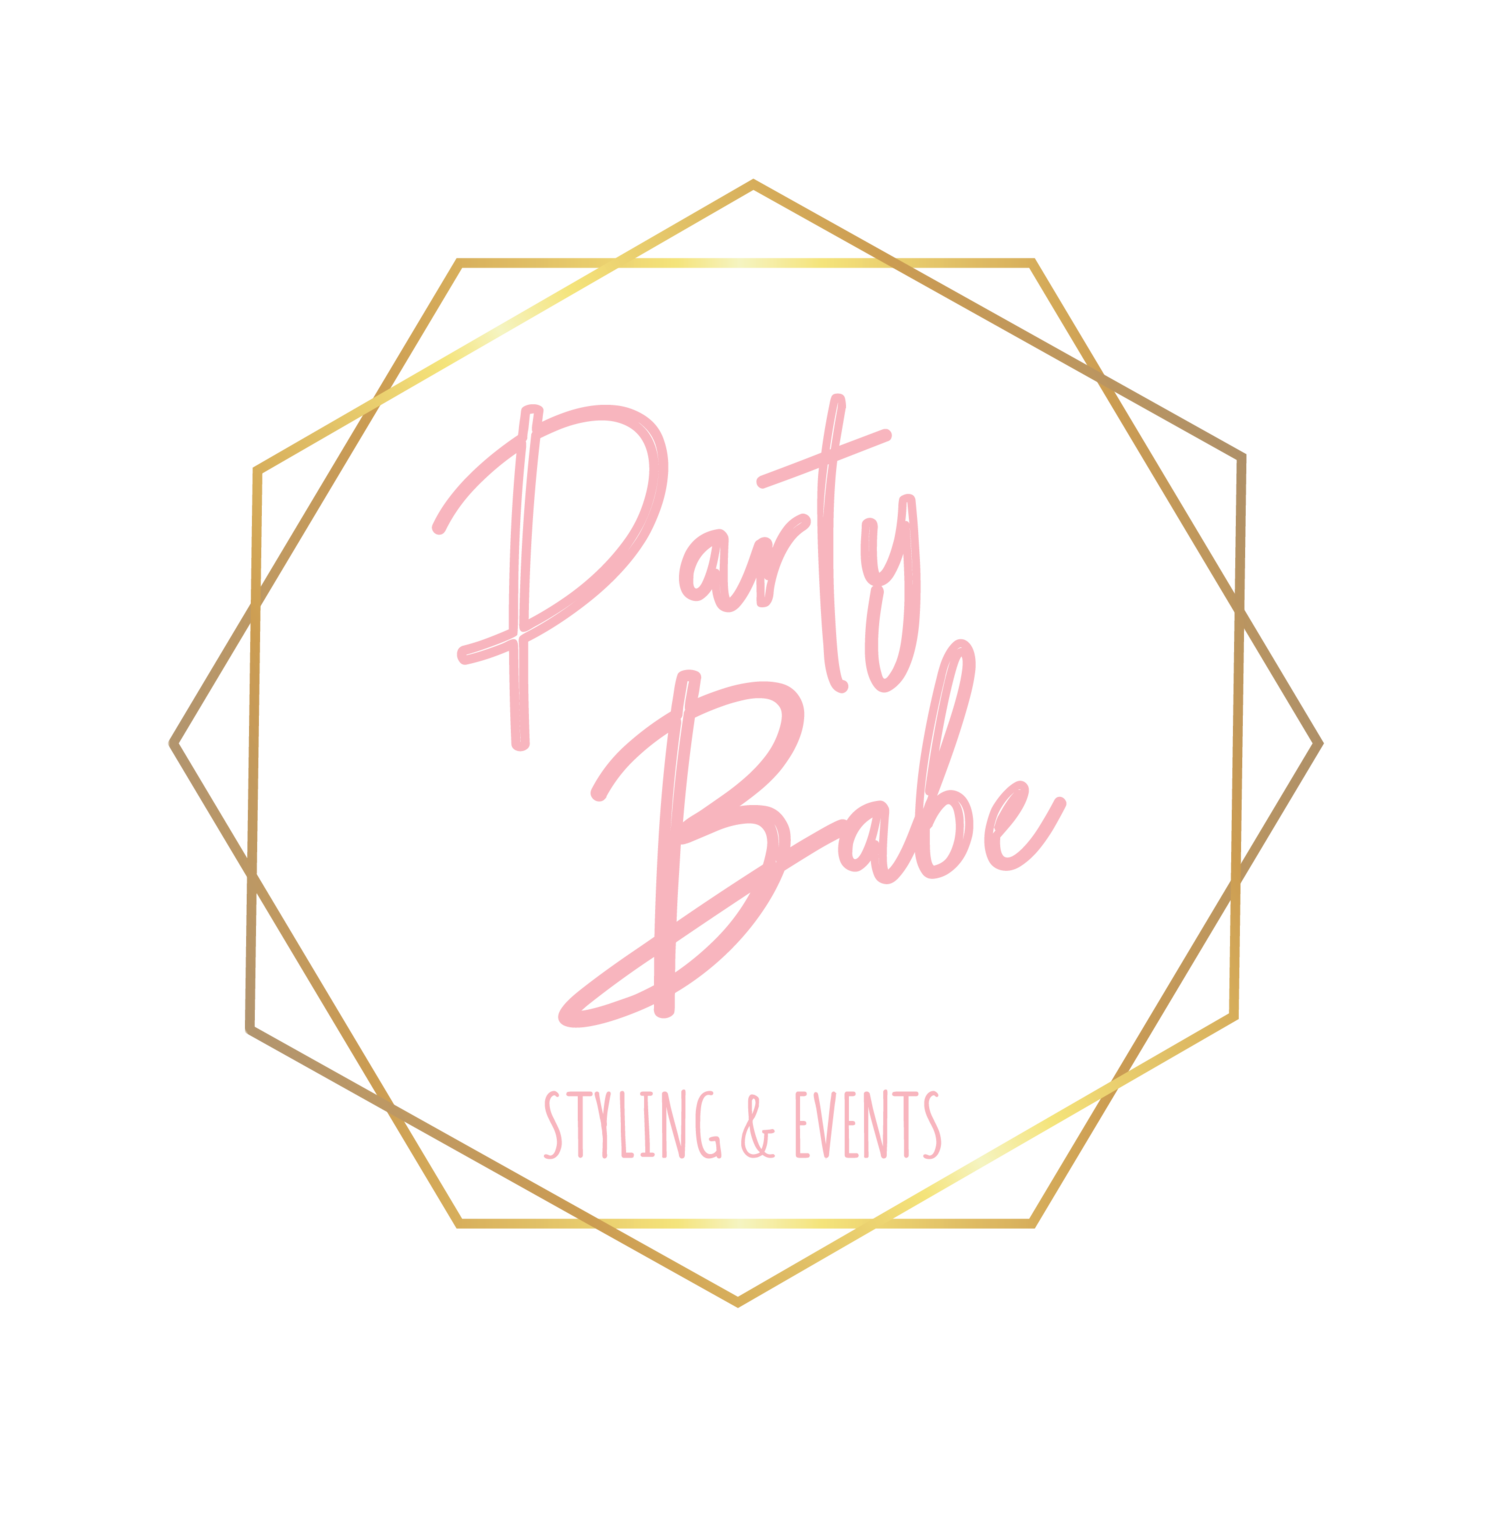 About — Party Babe Styling & Events